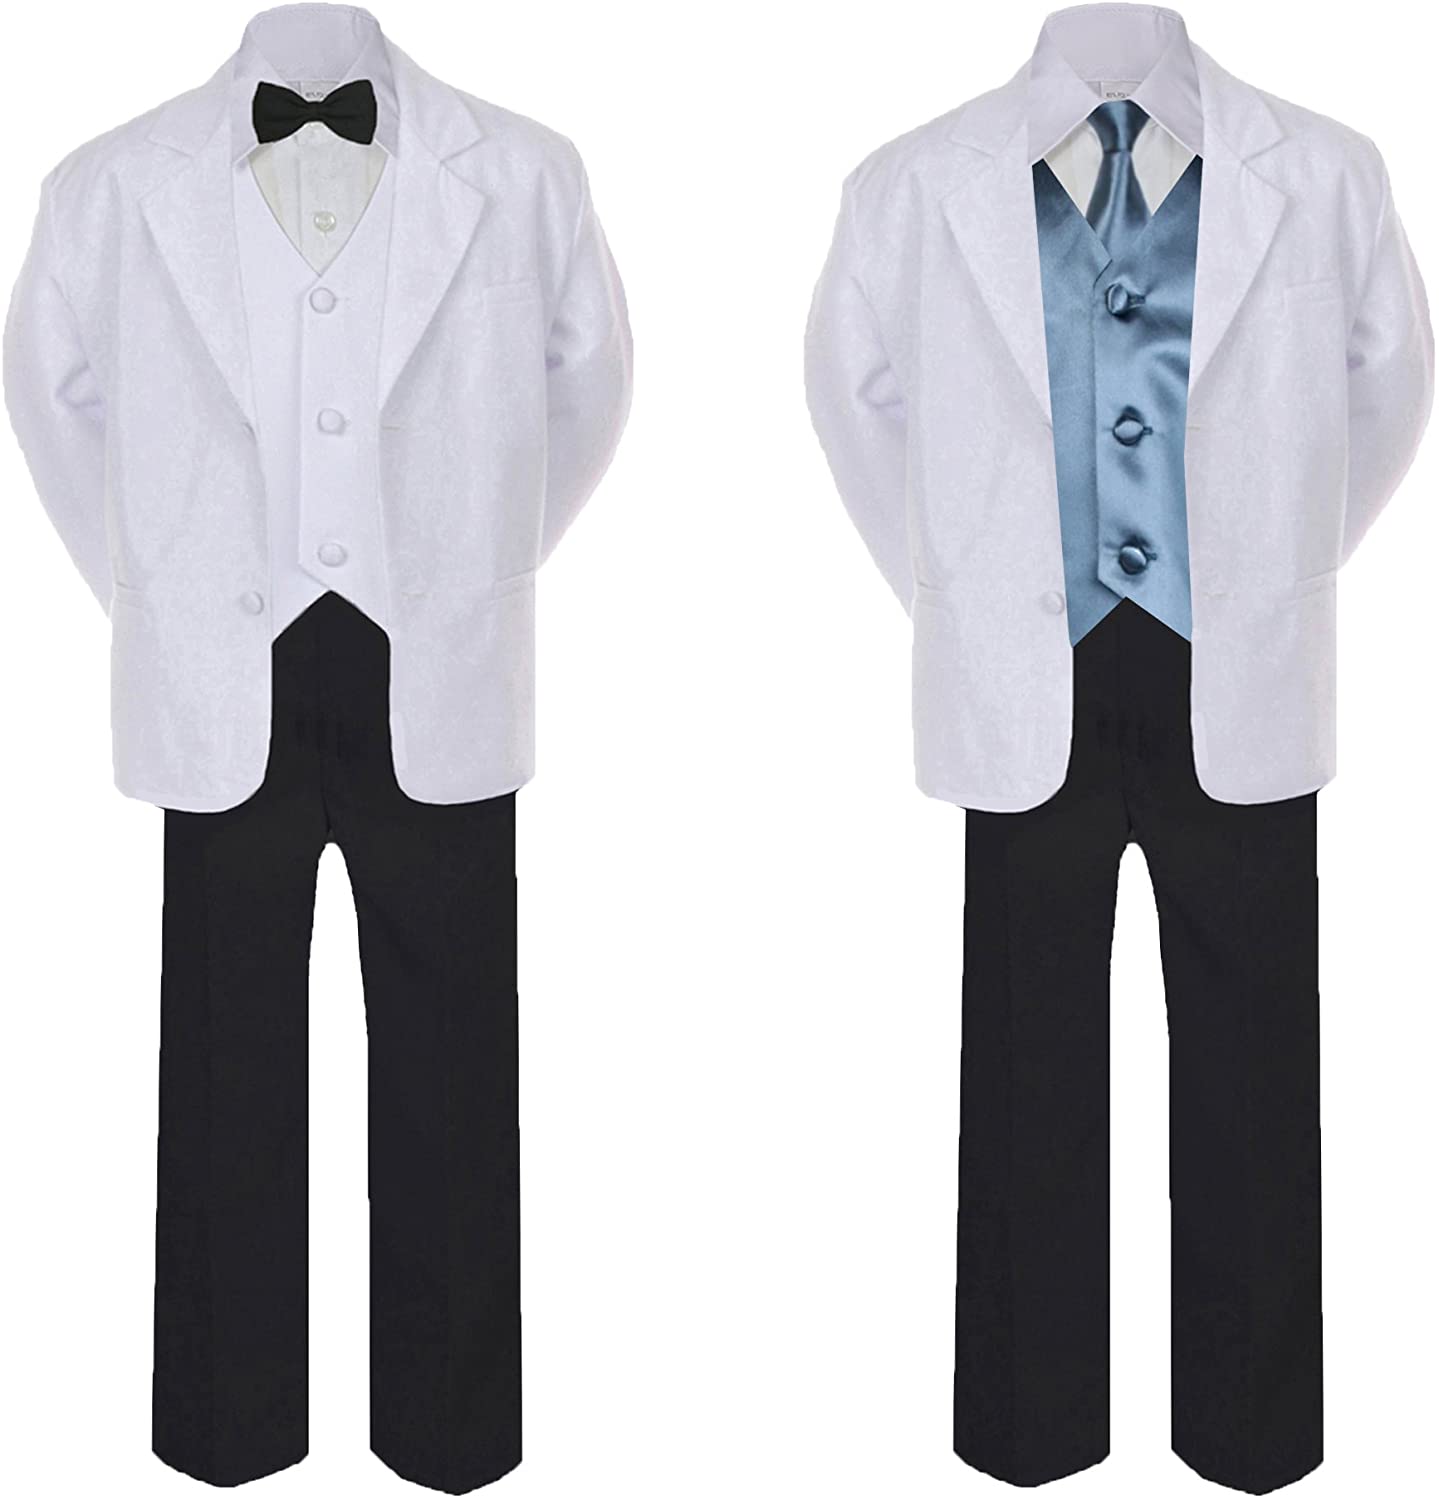 6pc Color Bow Tie + New Baby Toddler Boy Black Wedding Suit Tuxedo S-20 New Teen - image 2 of 3